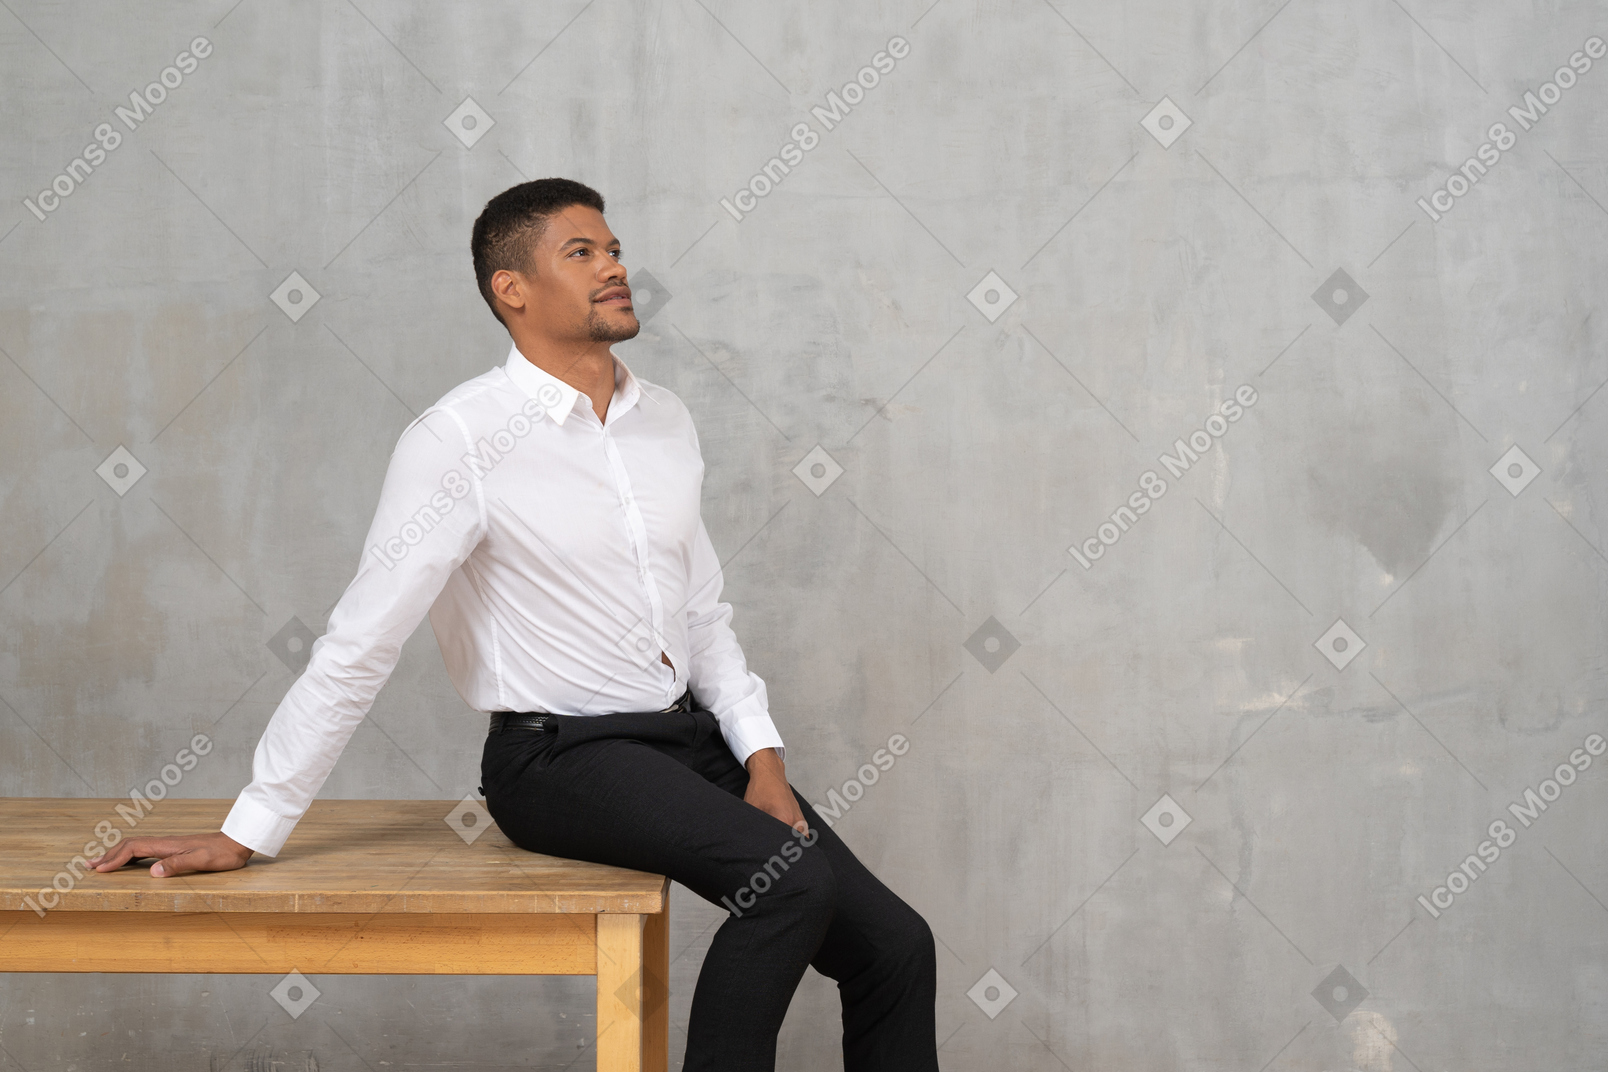 Man in office clothes sitting on a table and daydreaming